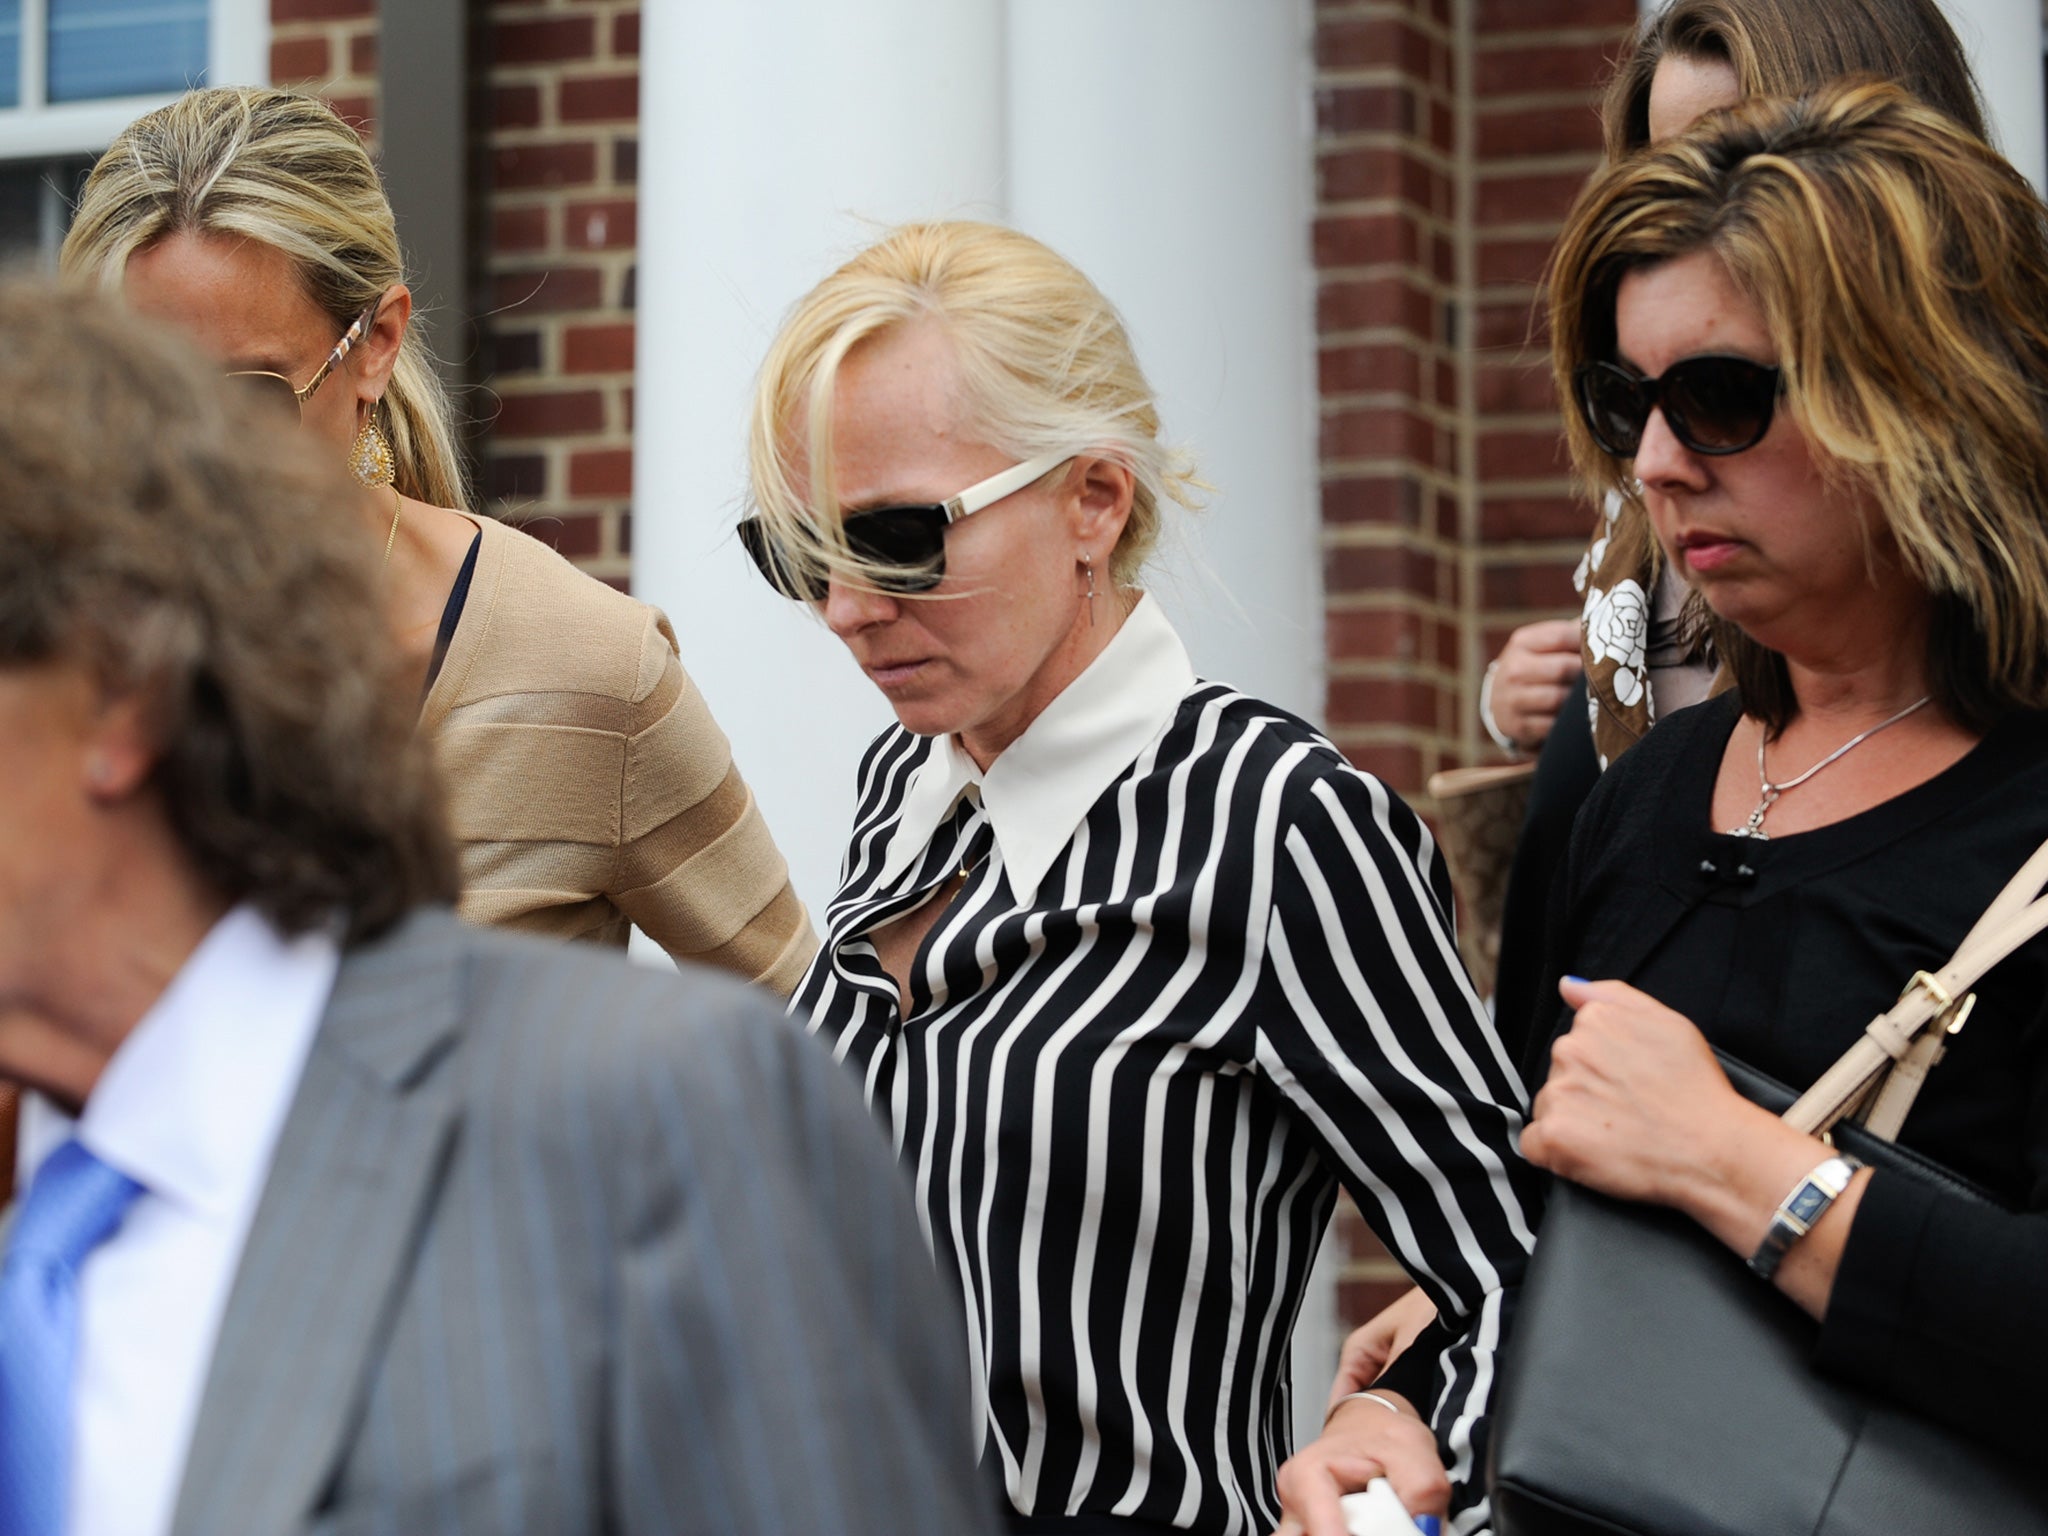 Molly Shattuck leaves the Sussex County Courthouse, Delaware